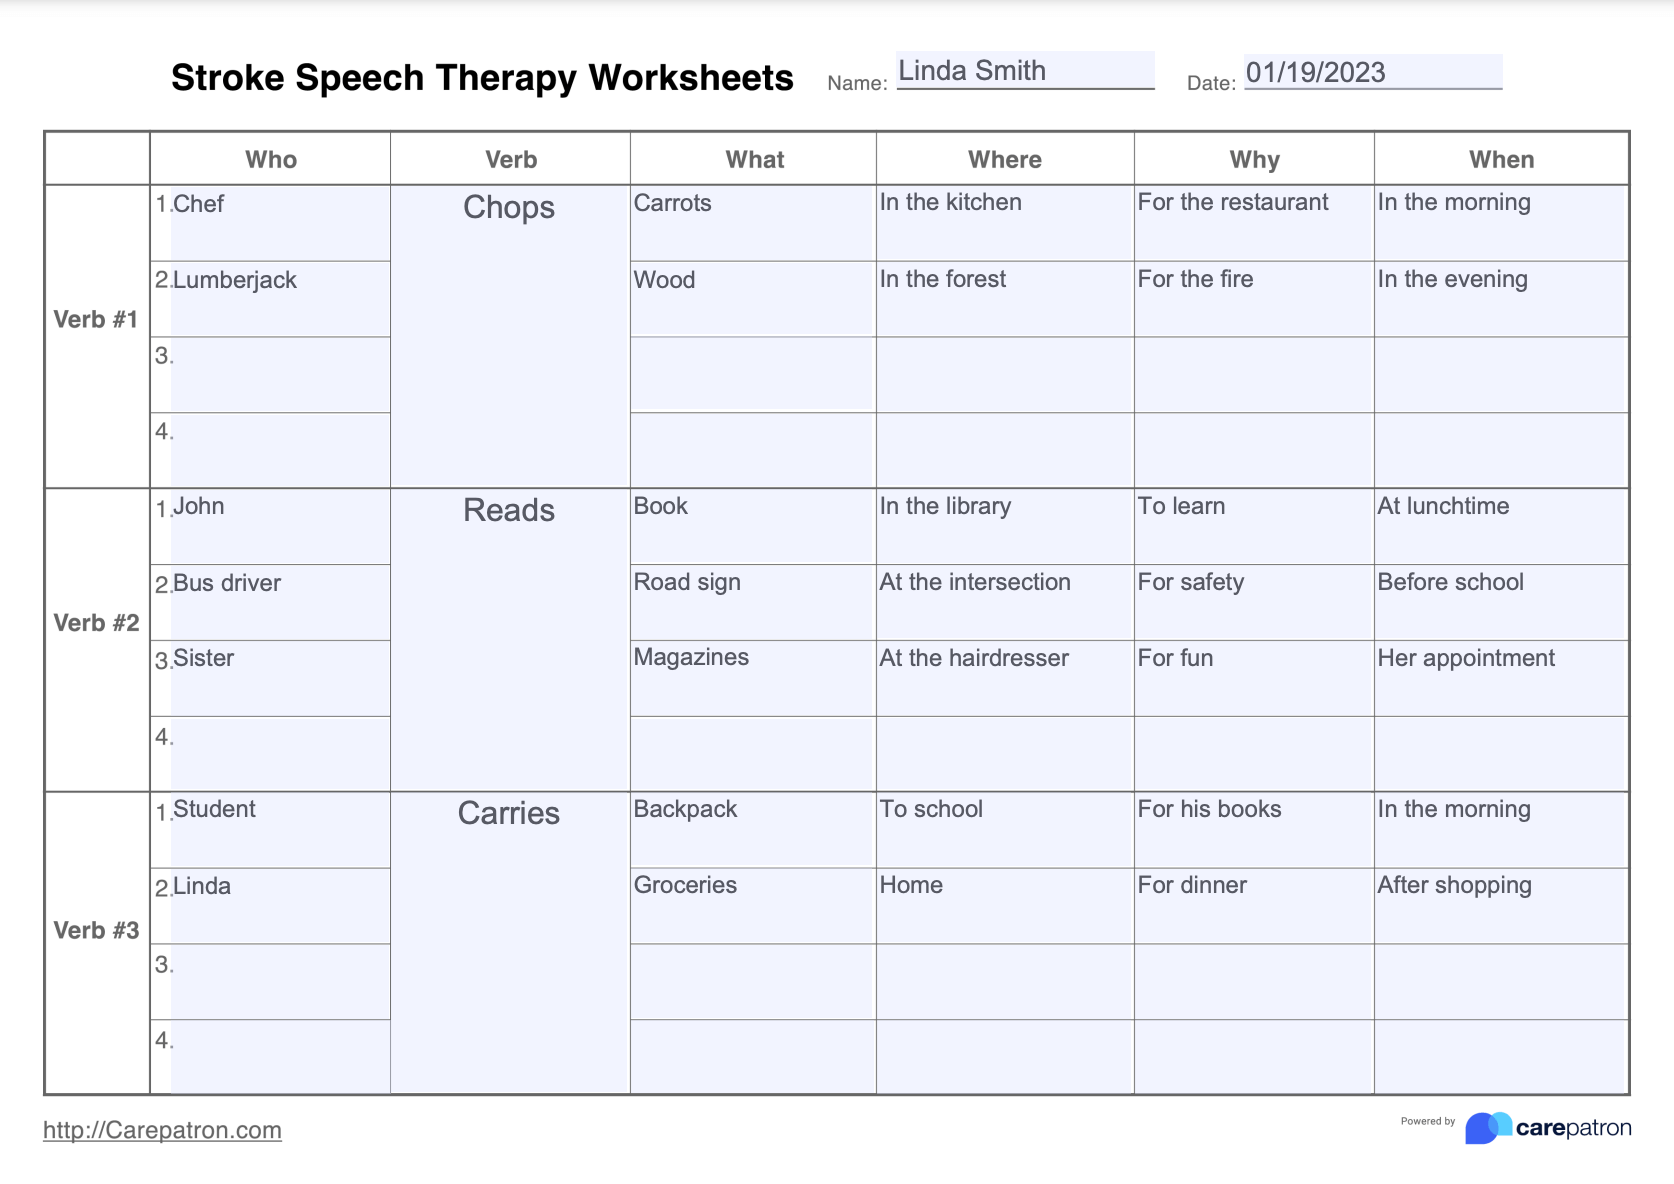 Stroke Speech Therapy Worksheet Example Free PDF Download